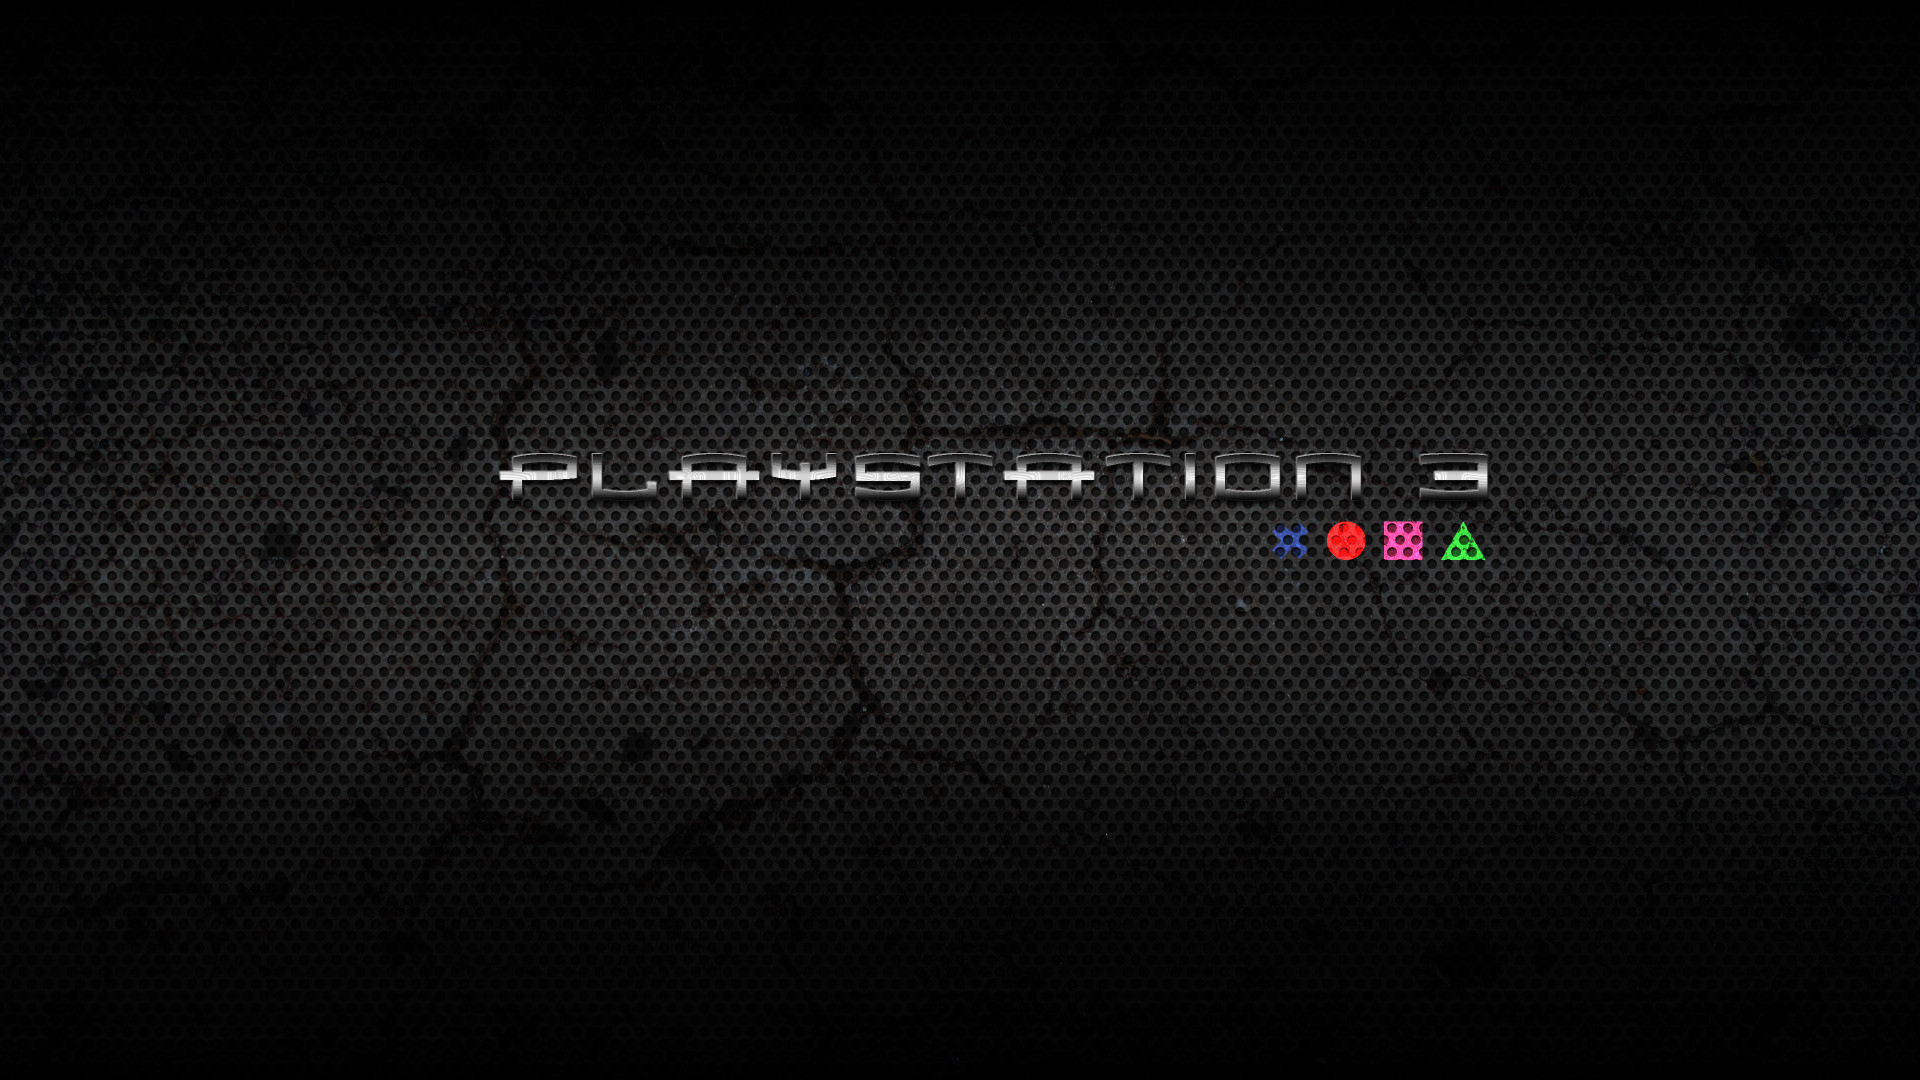 1920x1080  White Ps3 Controller Wallpaper Playstation 3 wallpaper 233632